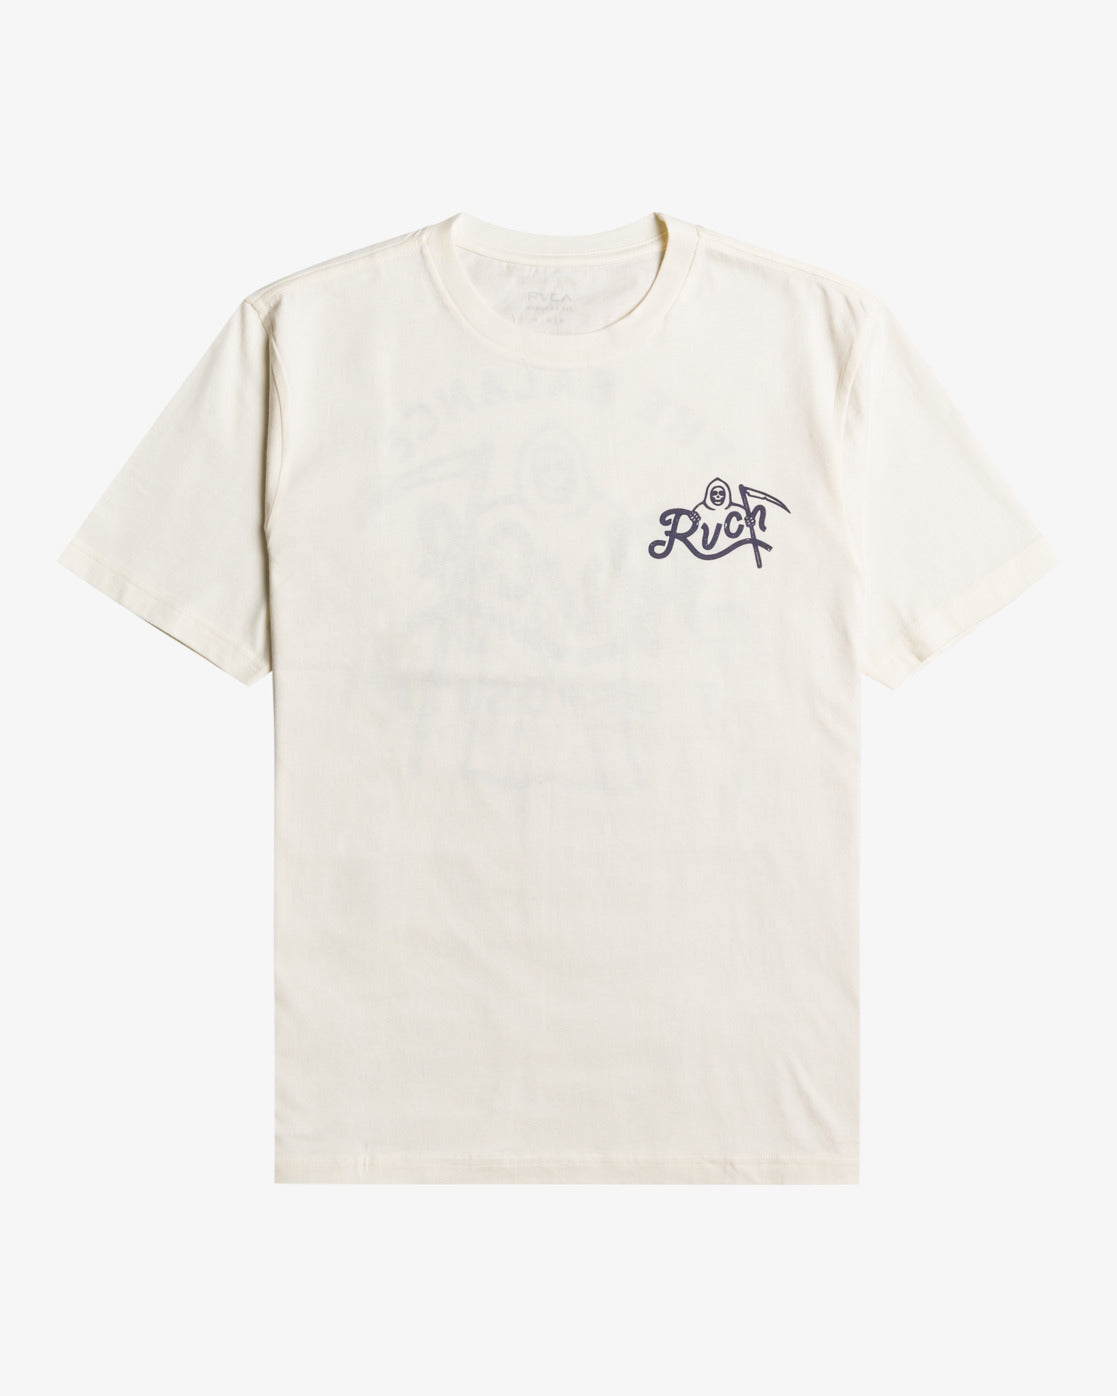 RVCA PARTING WAYS SS TEE - Antique White